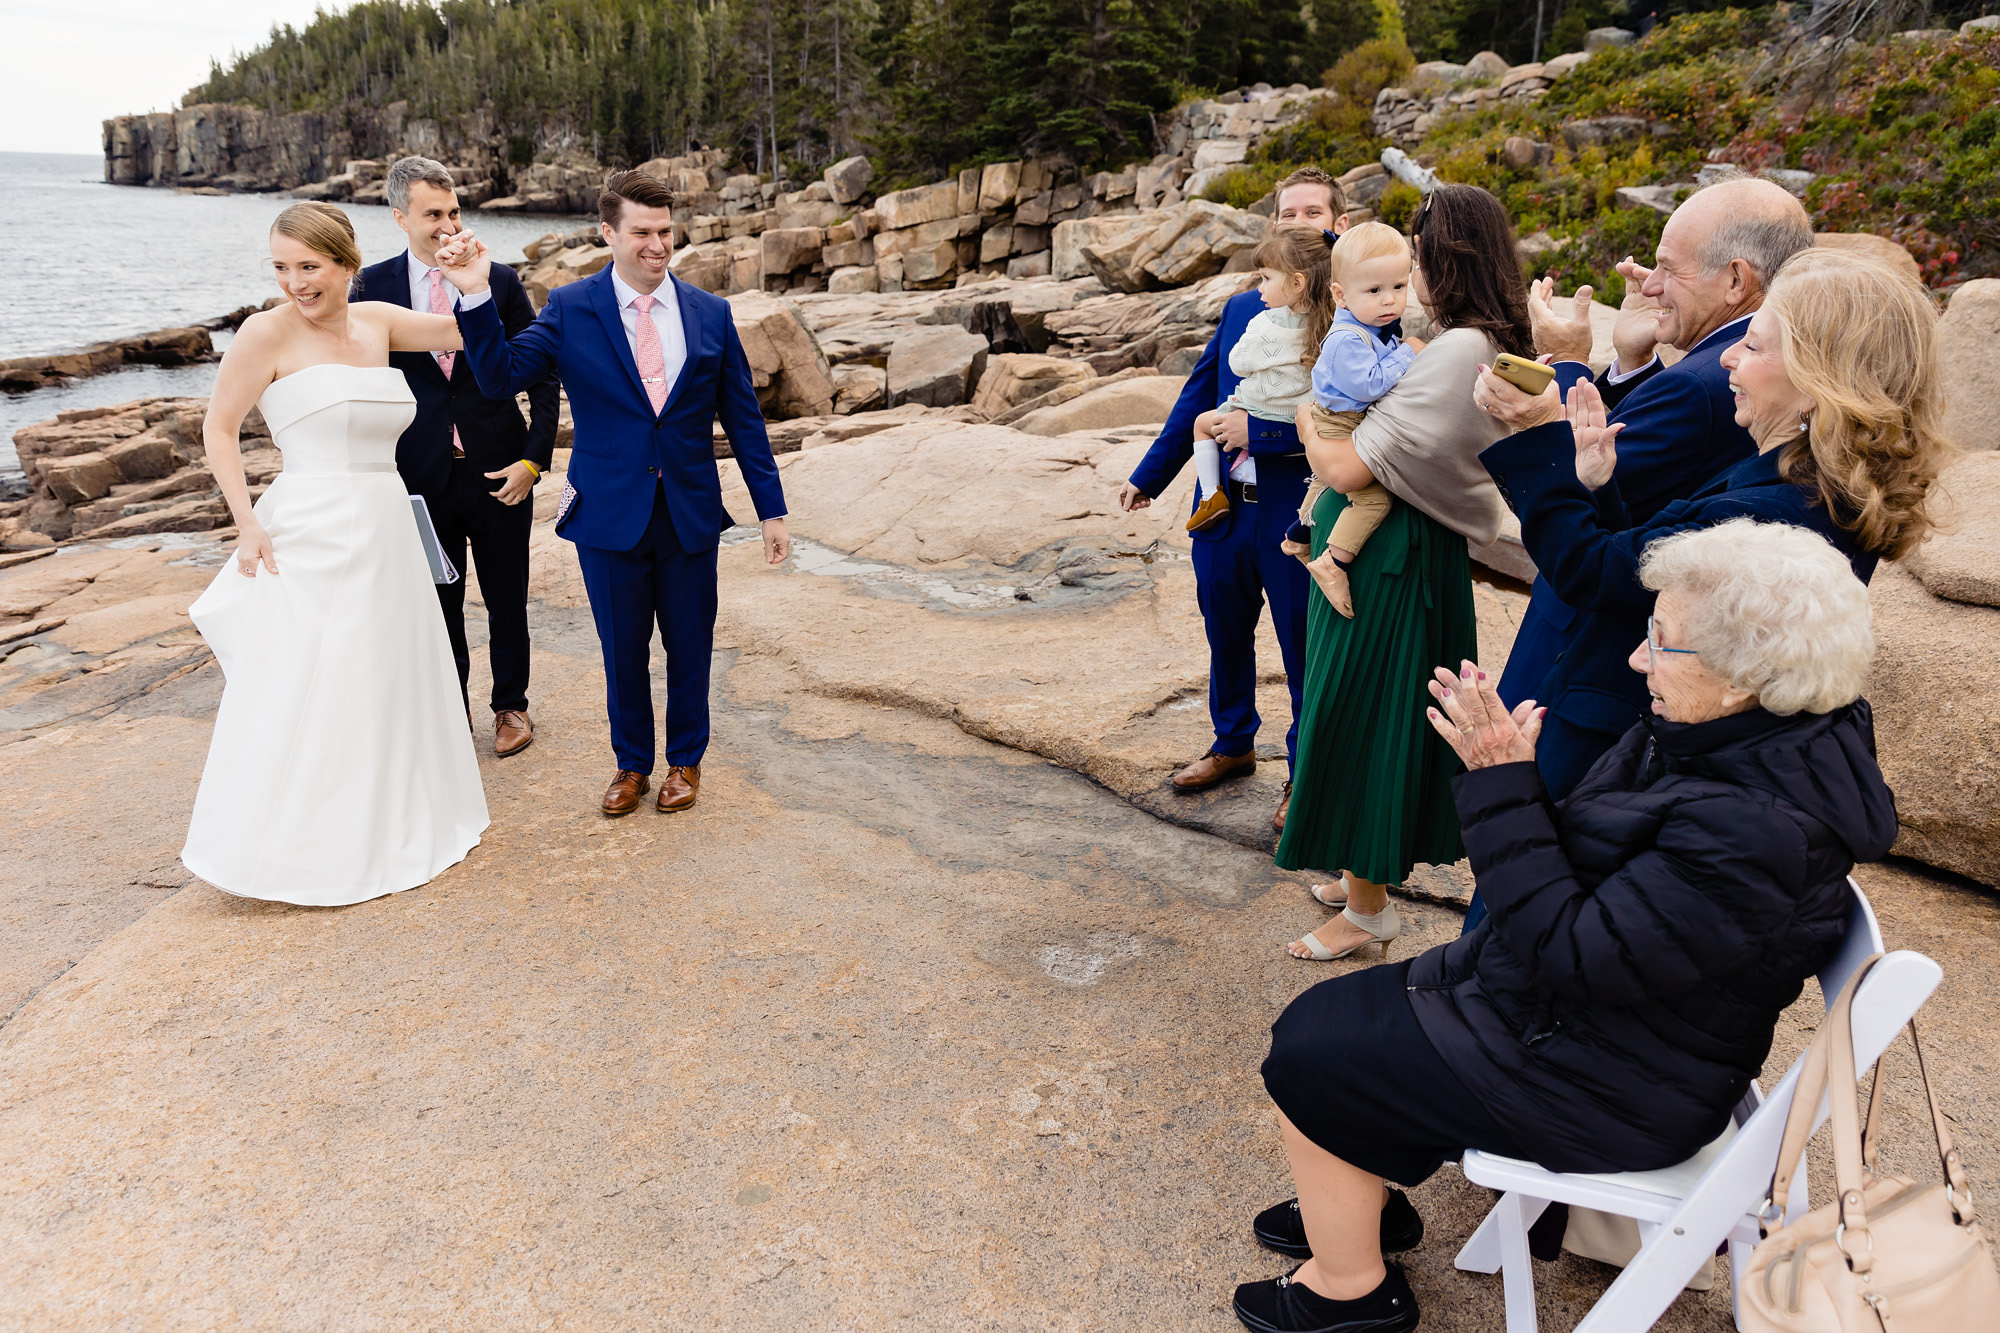 An intimate wedding ceremony at Acadia National Park